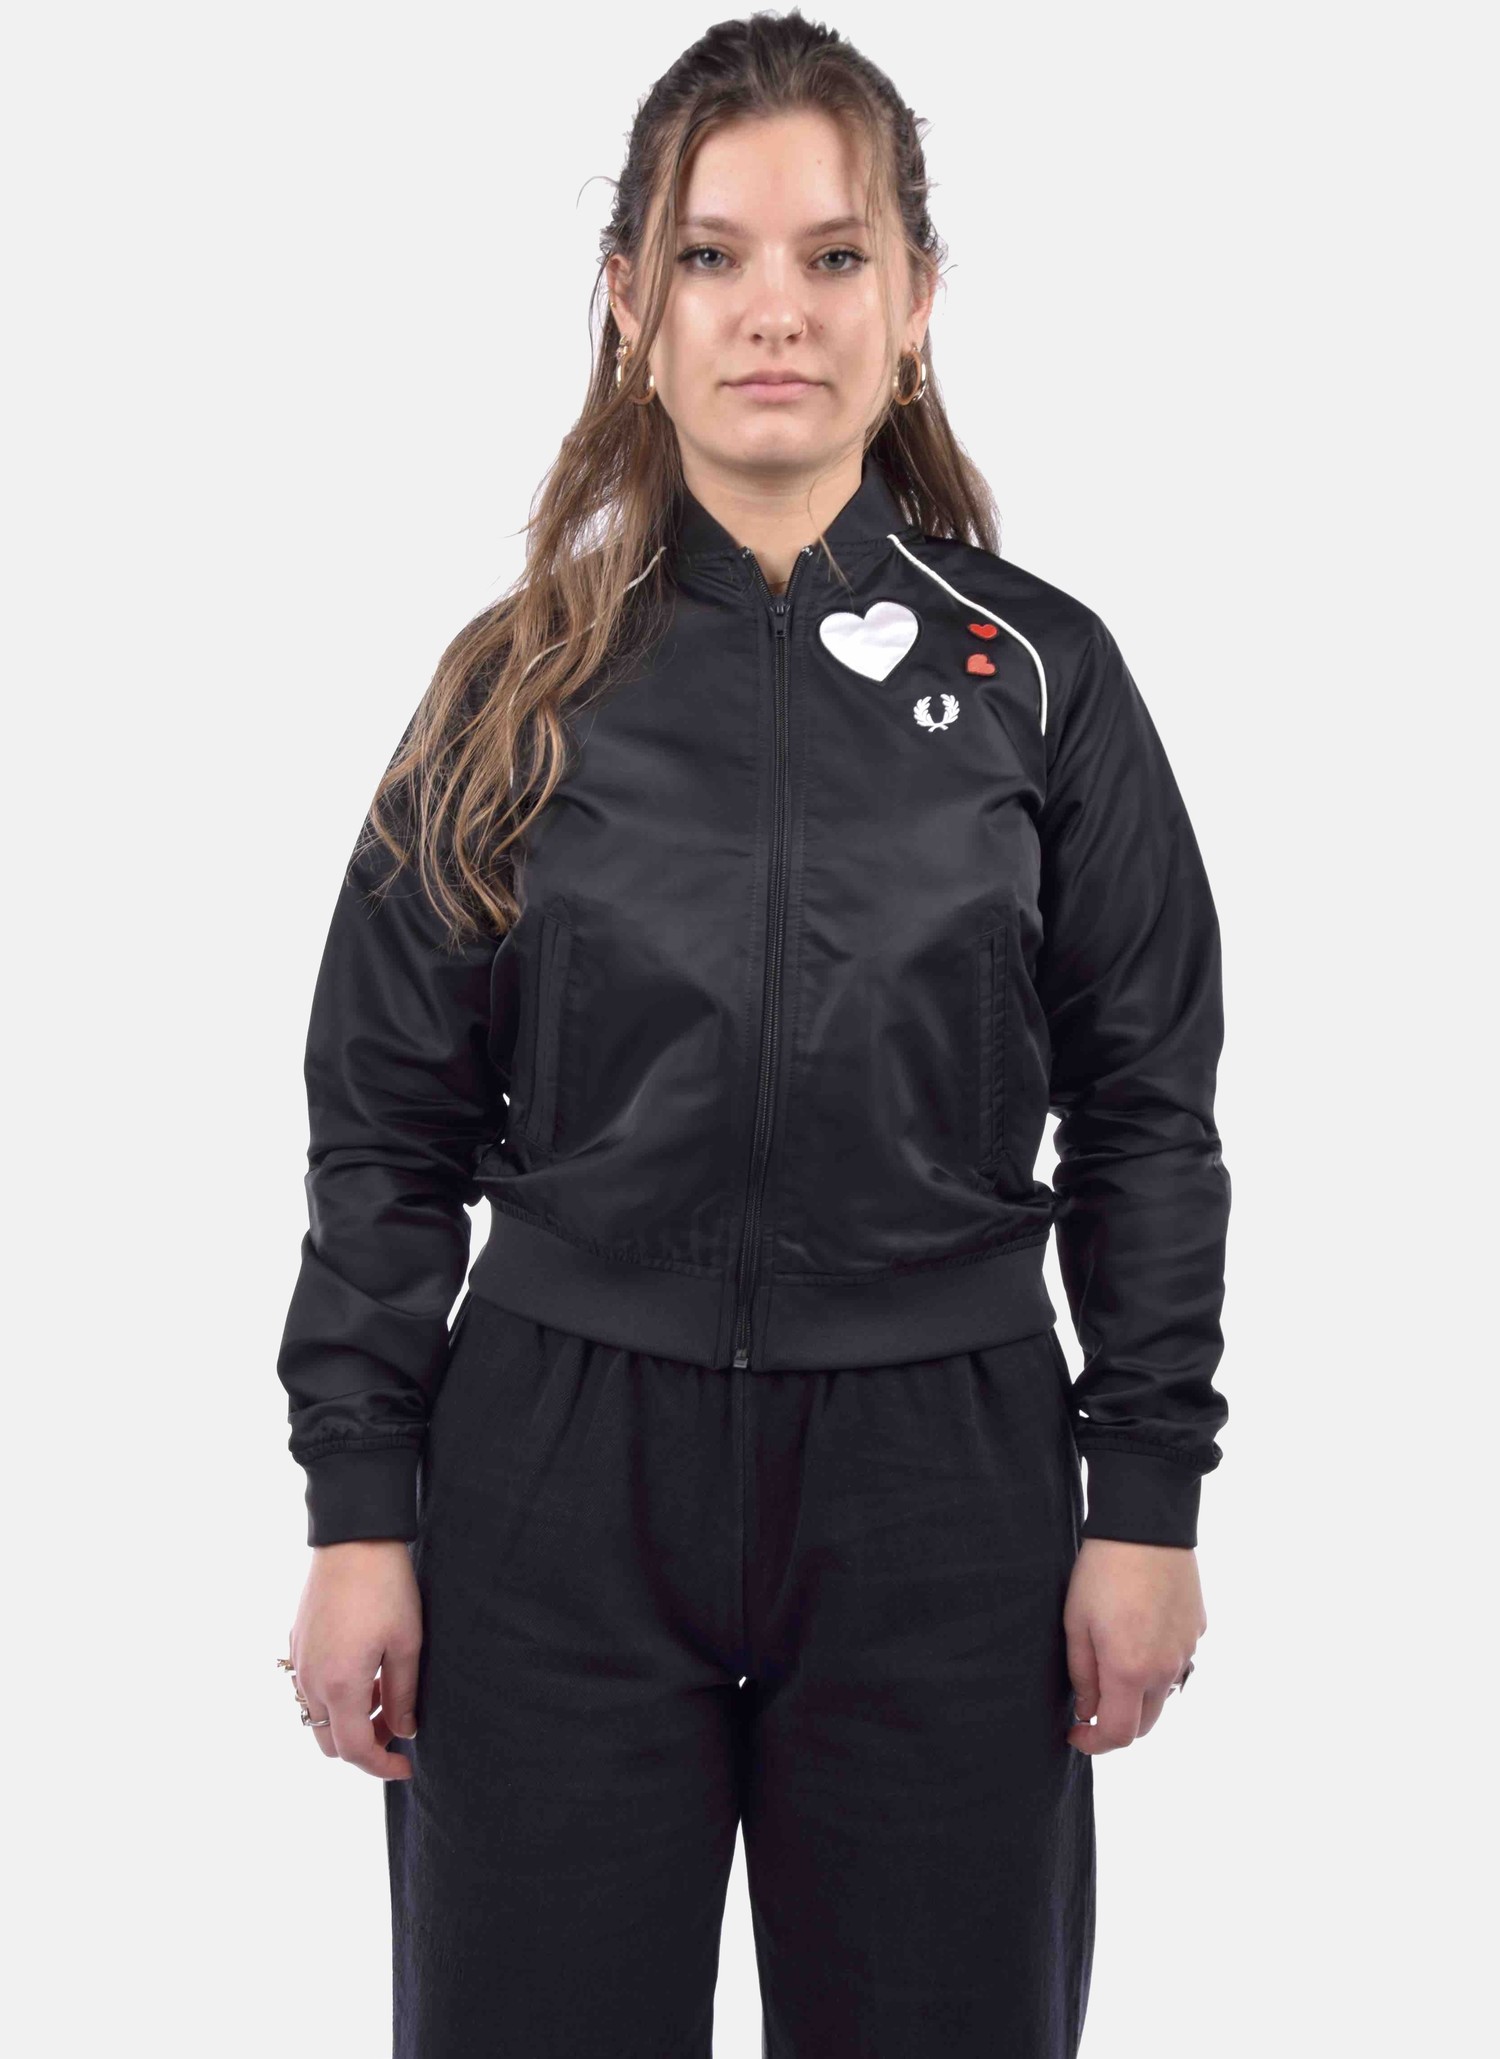 Fred Perry Jacket Women | sincovaga.com.br